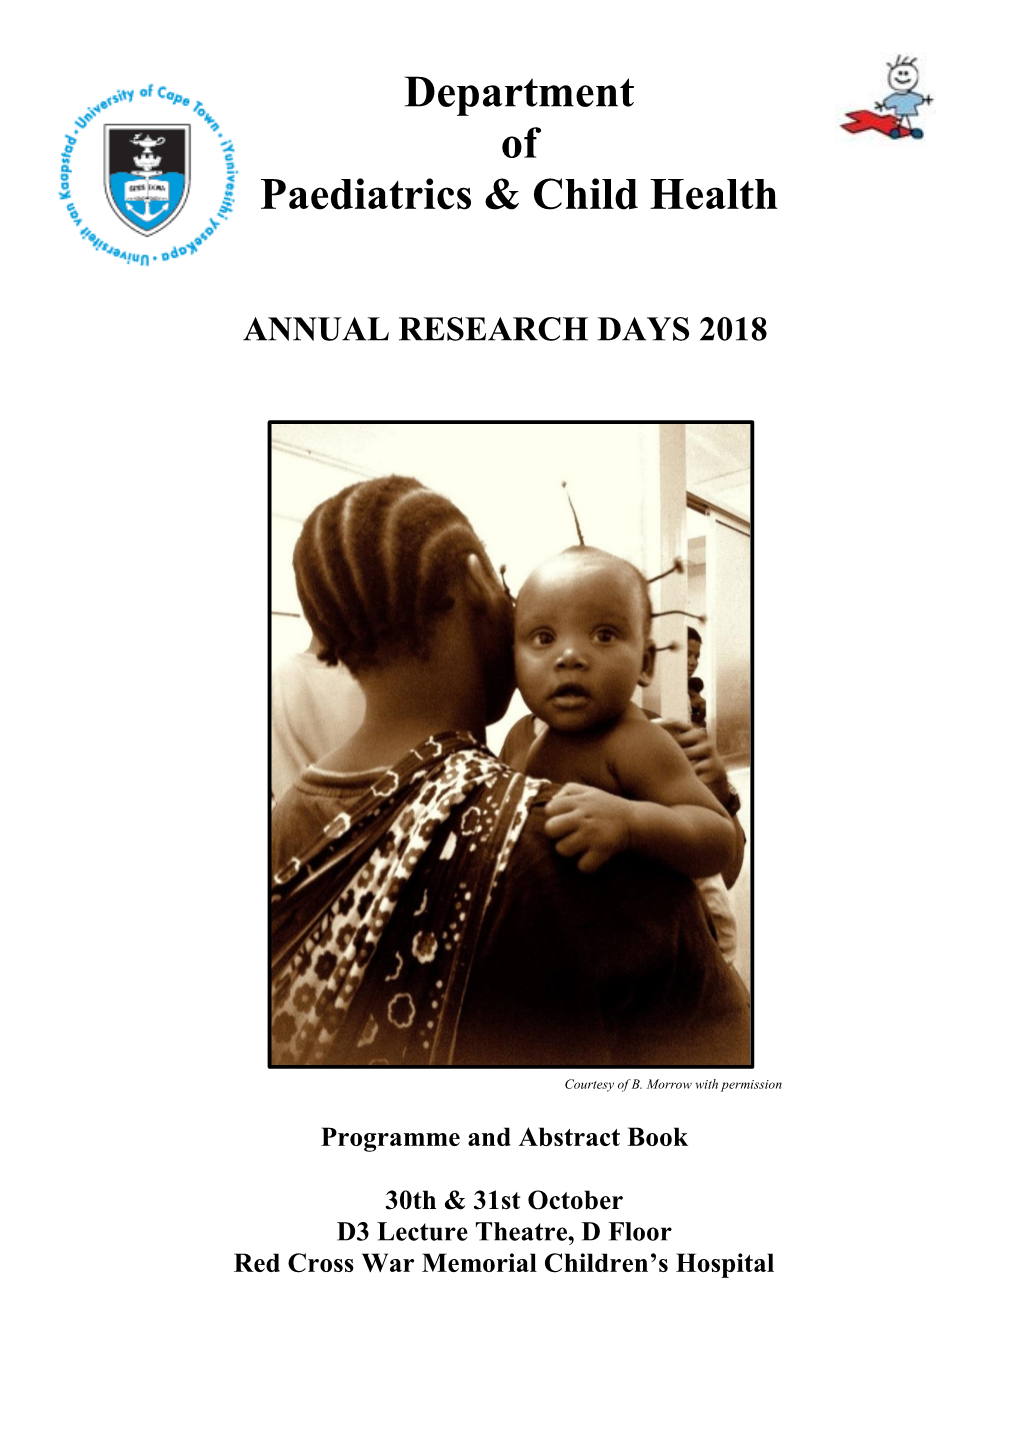 Research Day 2018 Abstract Booklet